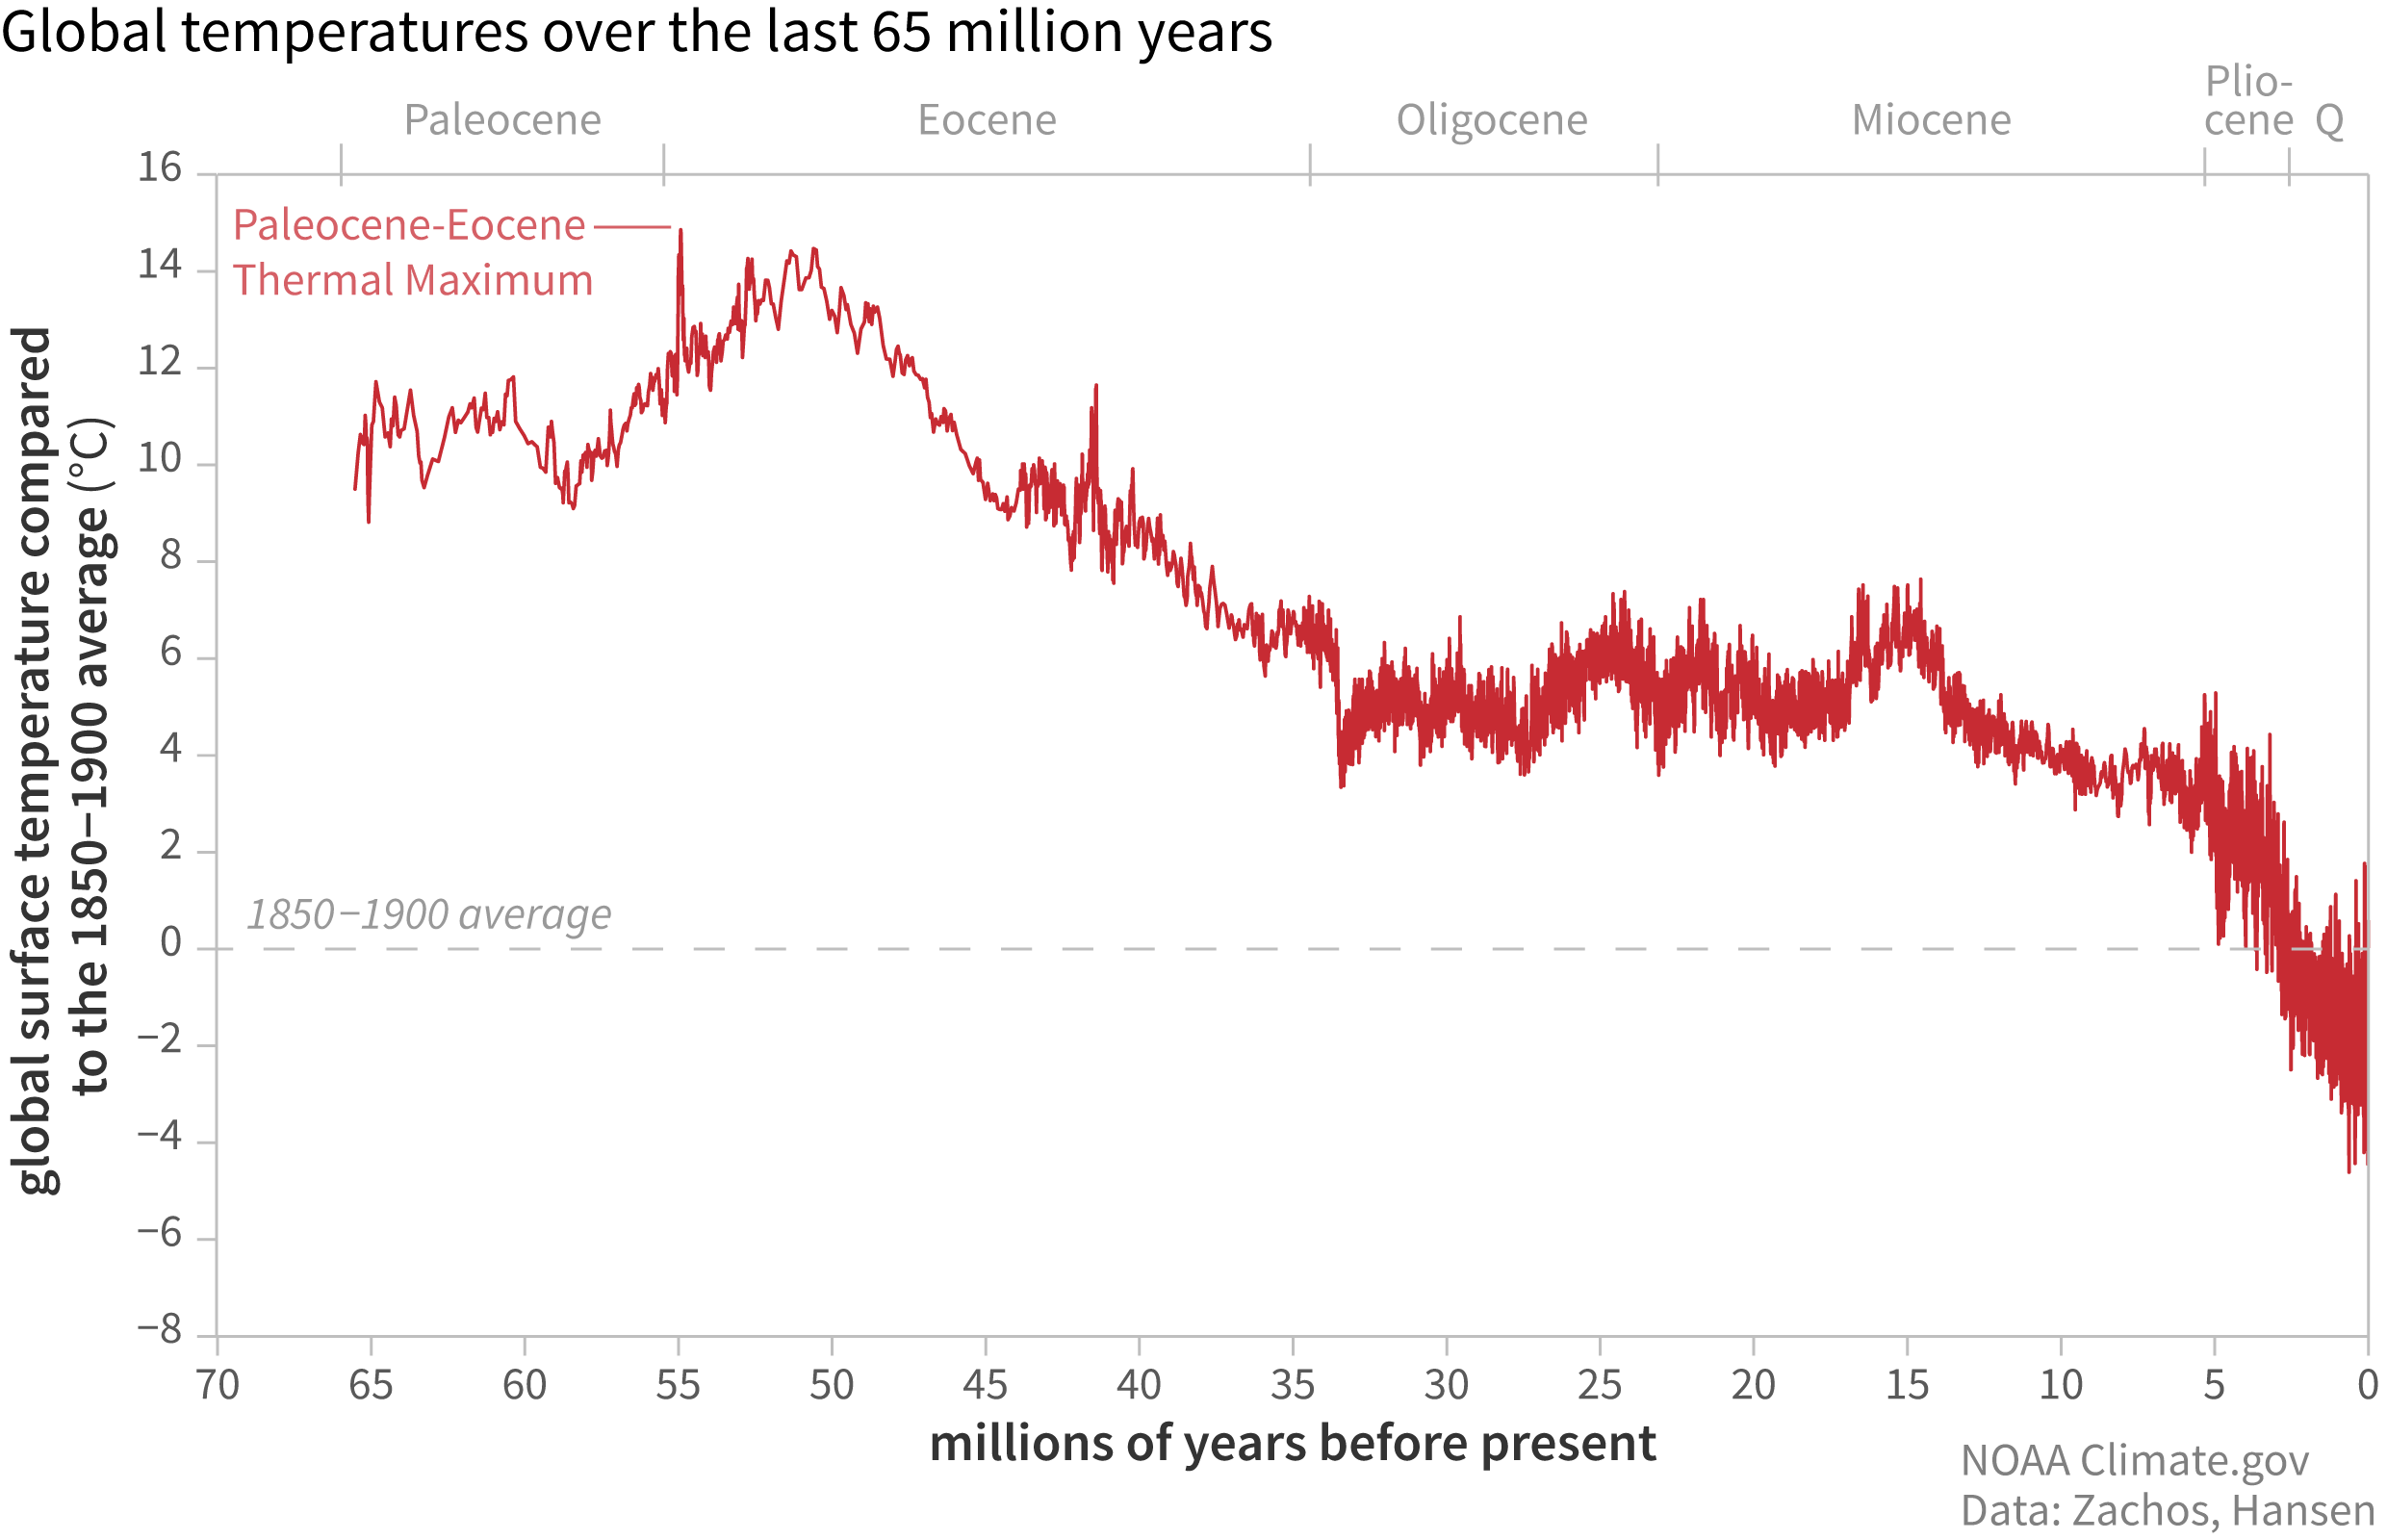 [Image: climateqa_global_surface_temps_65million_years_2480.png]